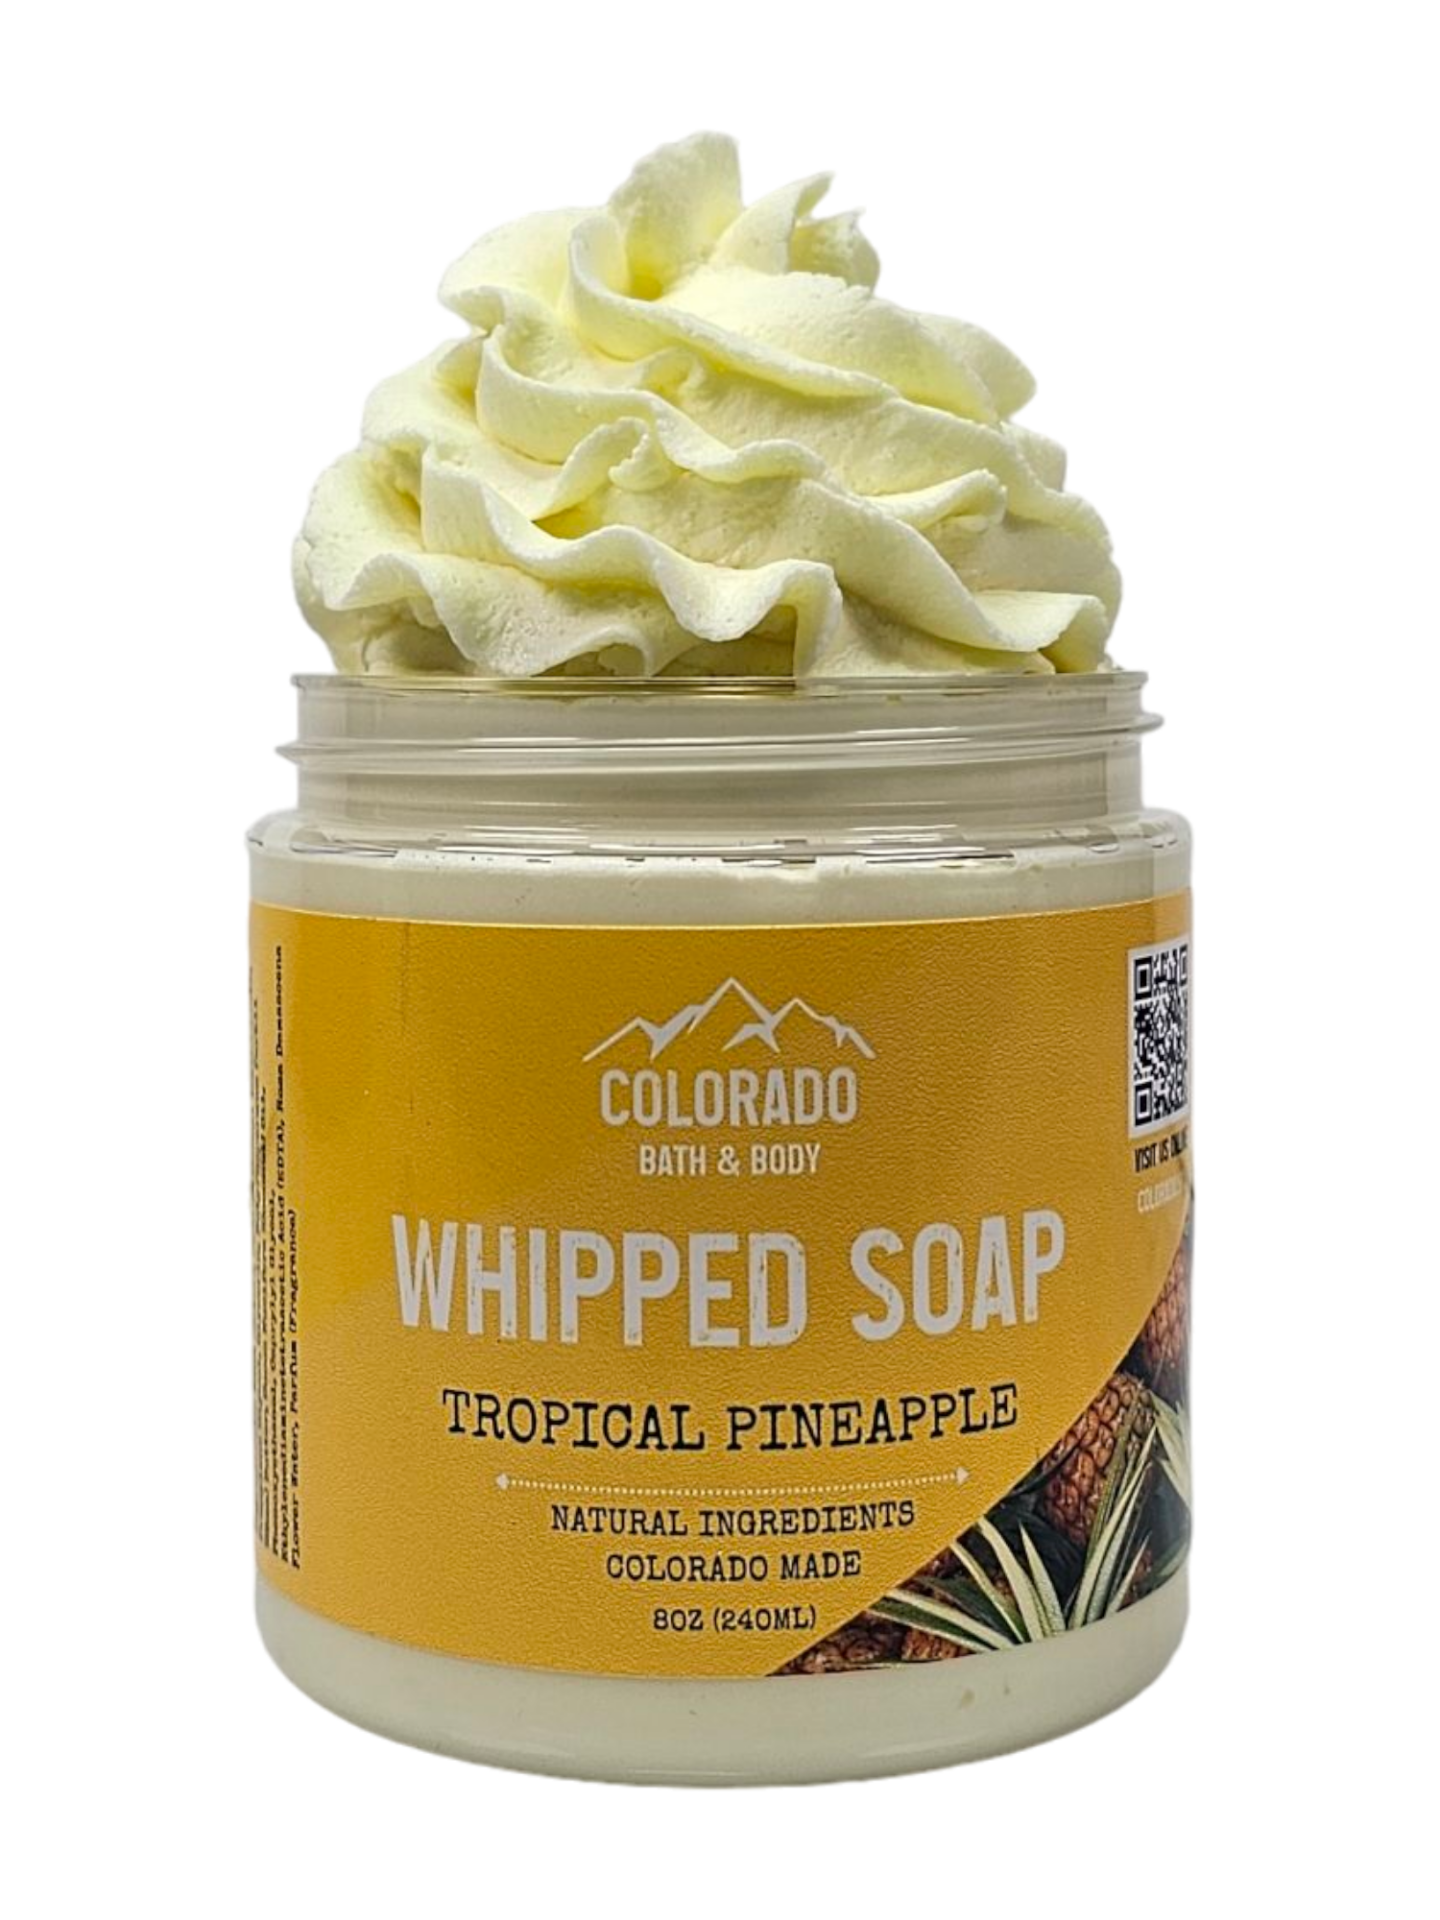 Tropical Pineapple Whipped Soap